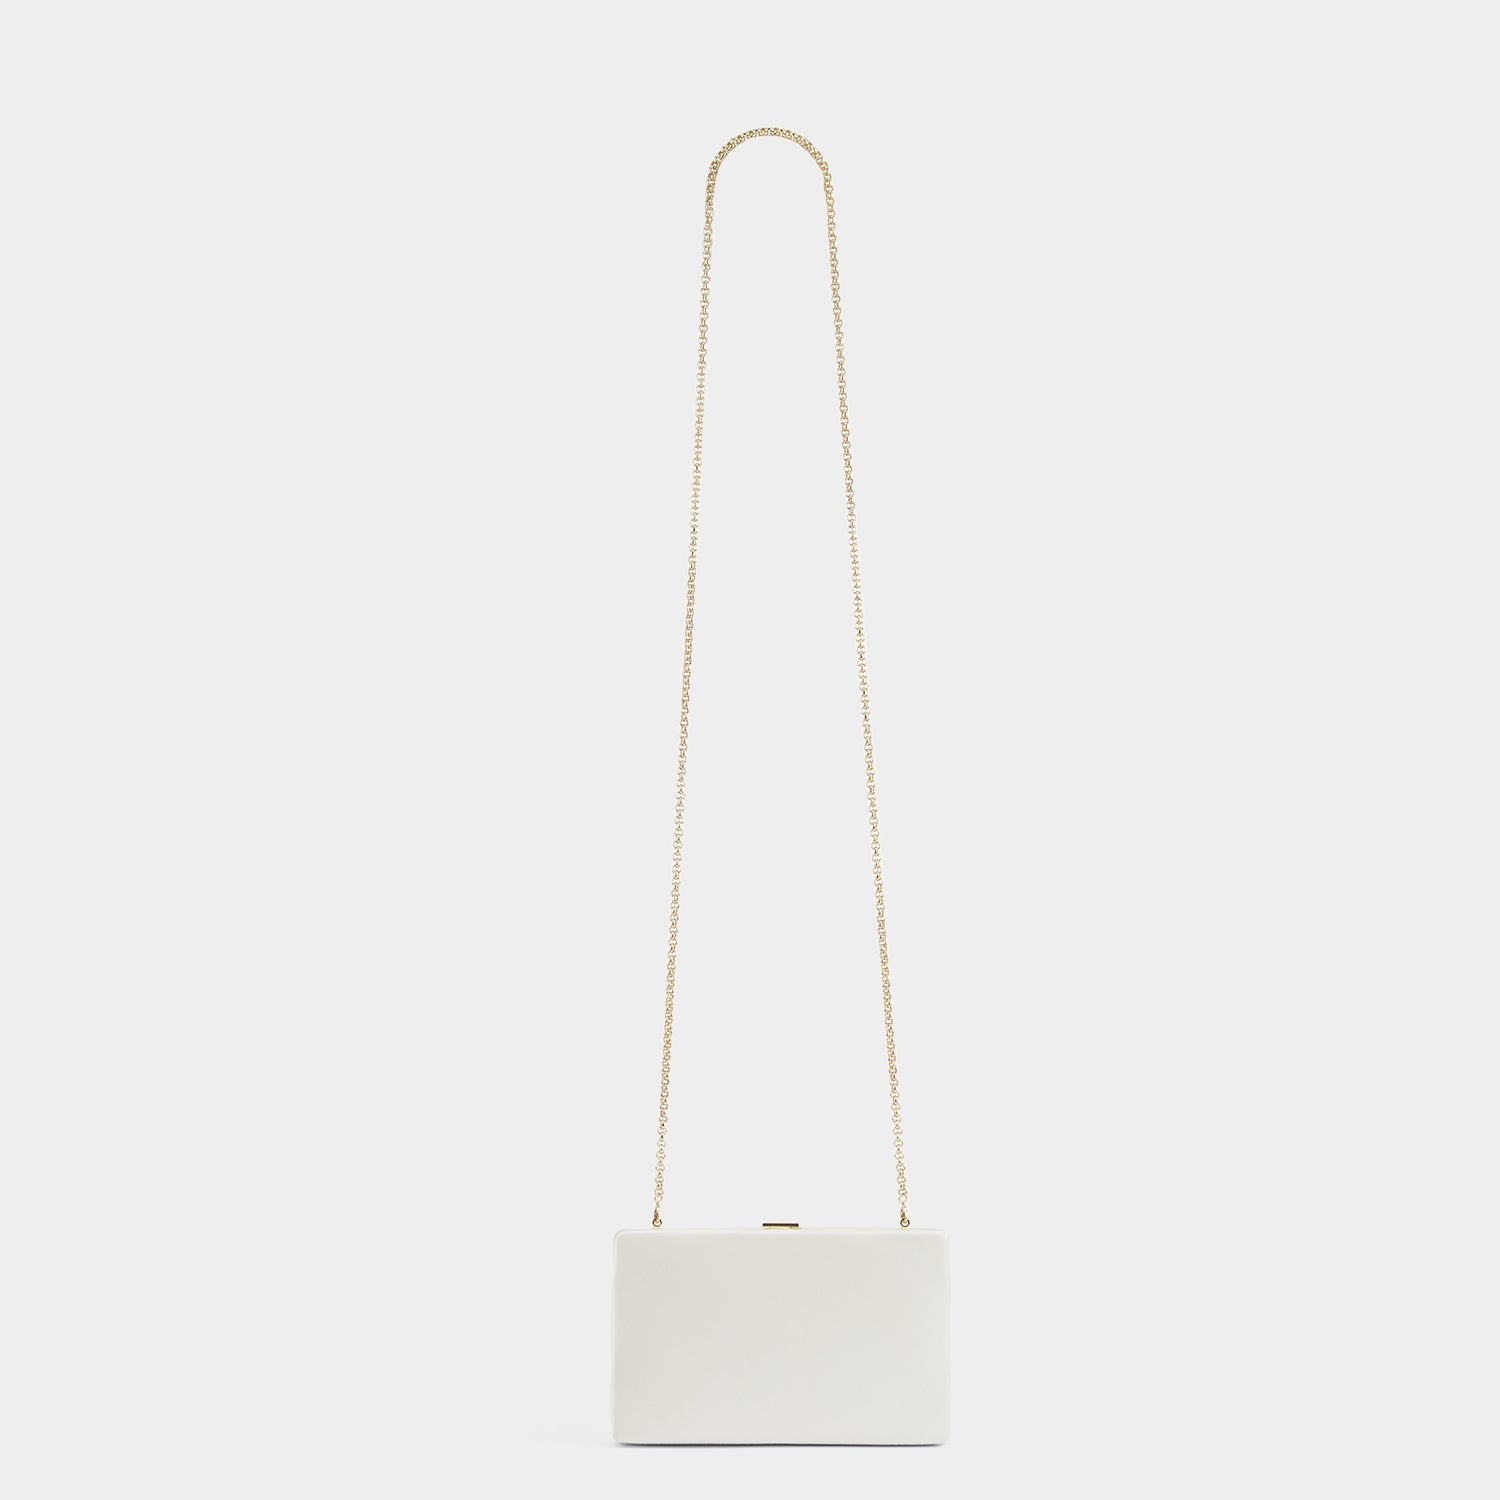 'I carry your heart' Clutch -

                  
                    Recycled Satin in Ivory -
                  

                  Anya Hindmarch US
